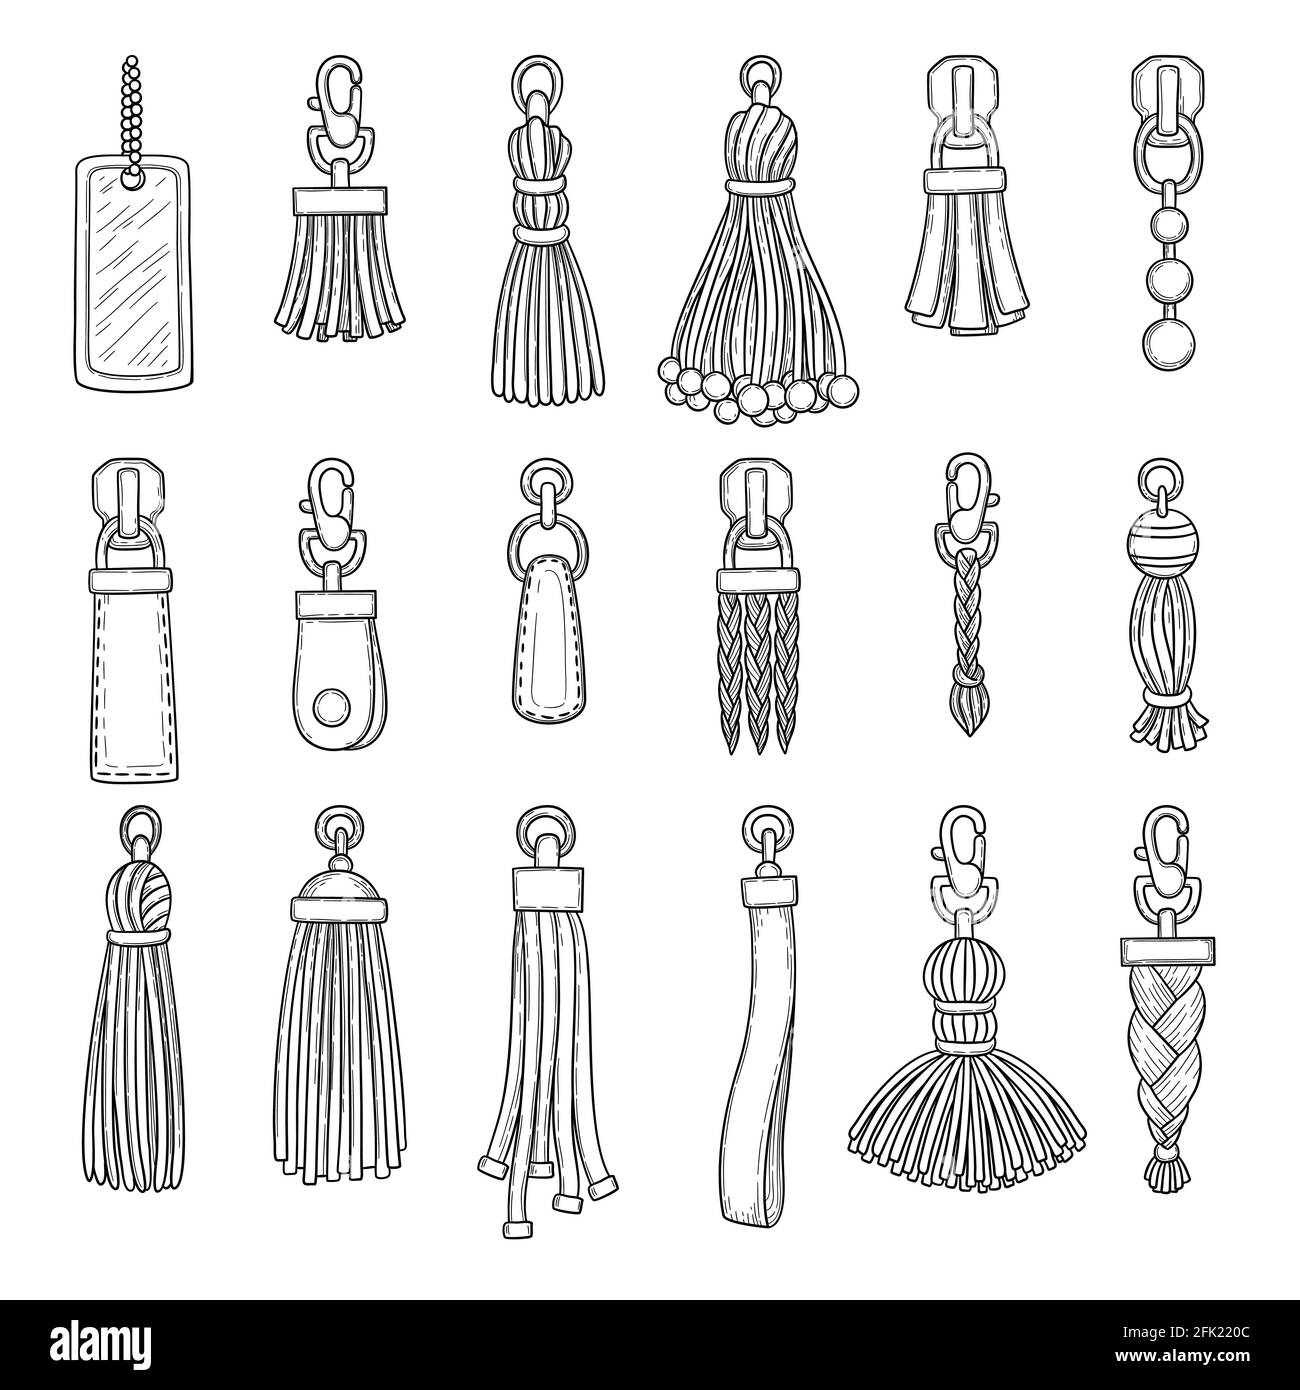 Leather accessories. Handbag fringes trinket vector fashioned items collection Stock Vector